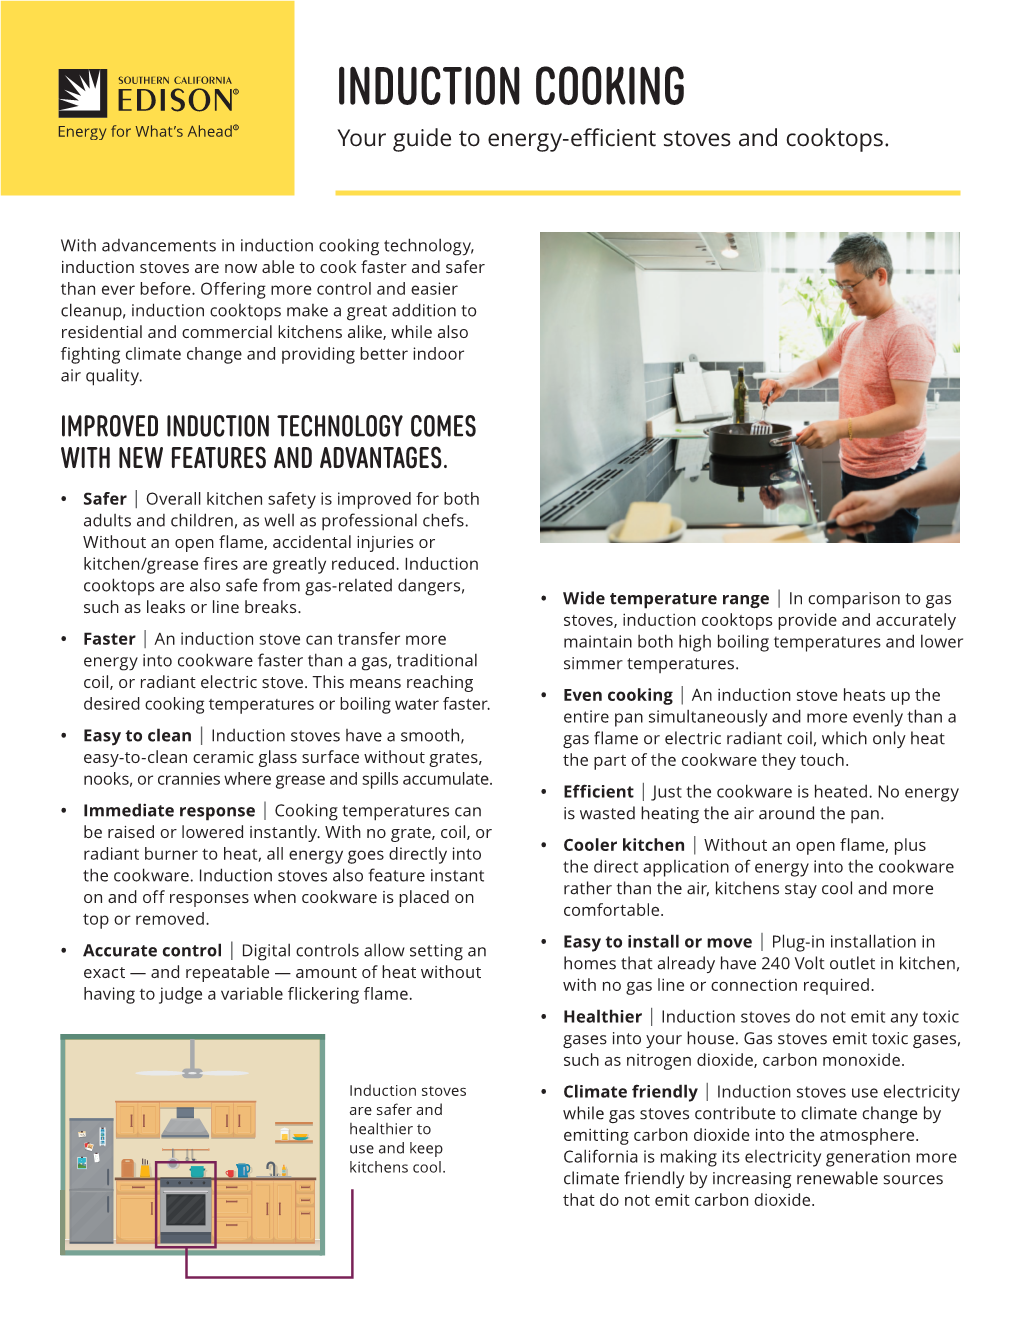 Induction Cooking Fact Sheet WCAG